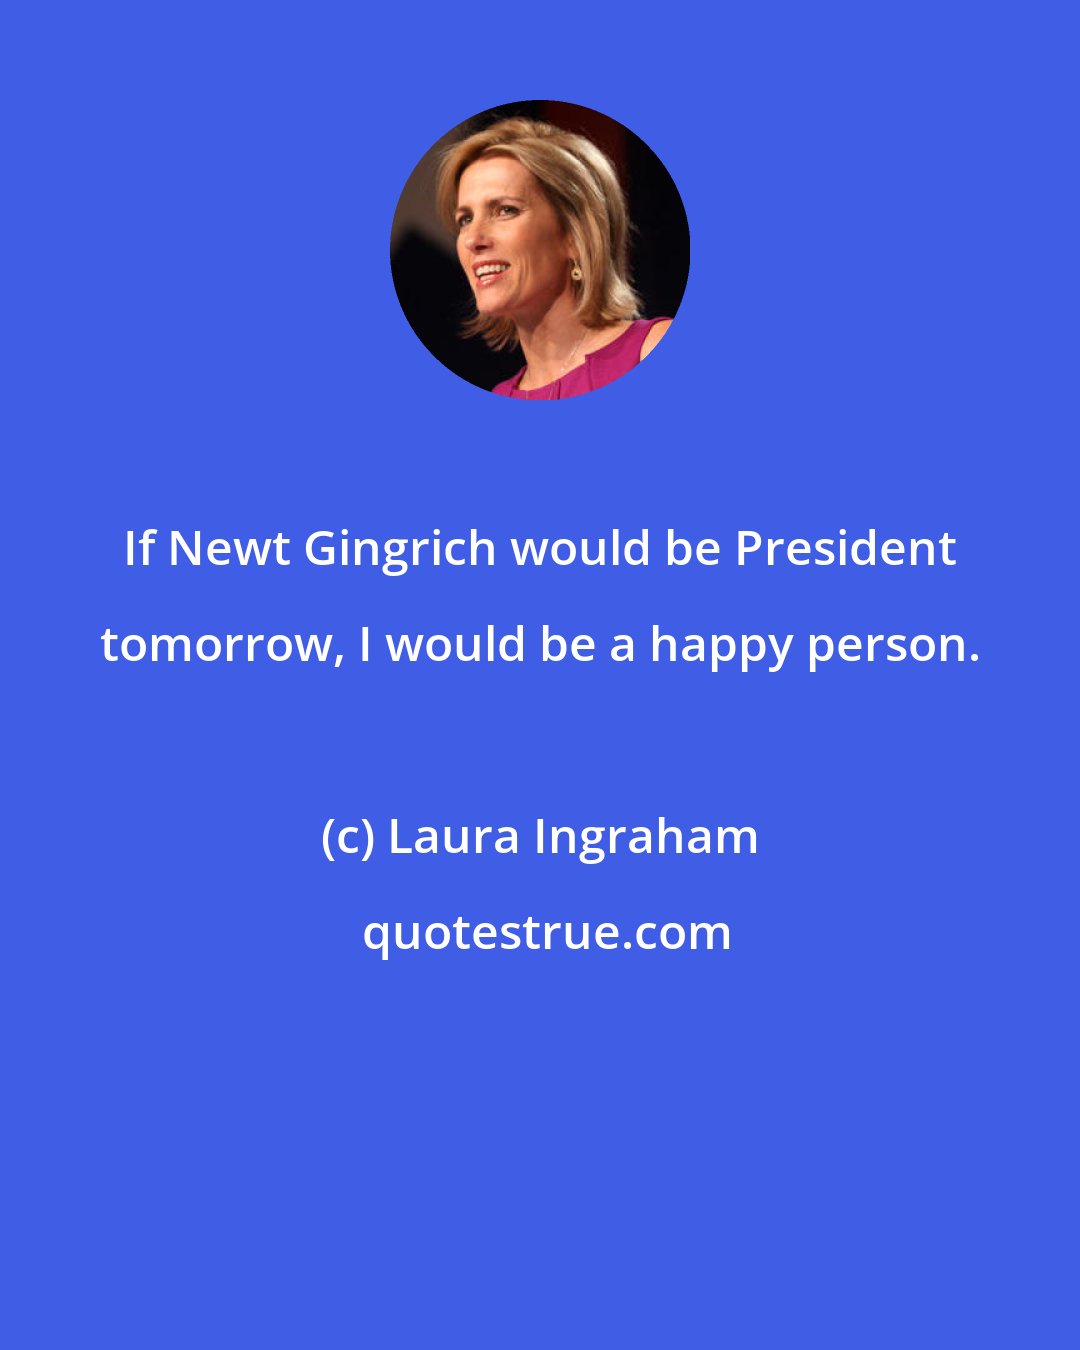 Laura Ingraham: If Newt Gingrich would be President tomorrow, I would be a happy person.